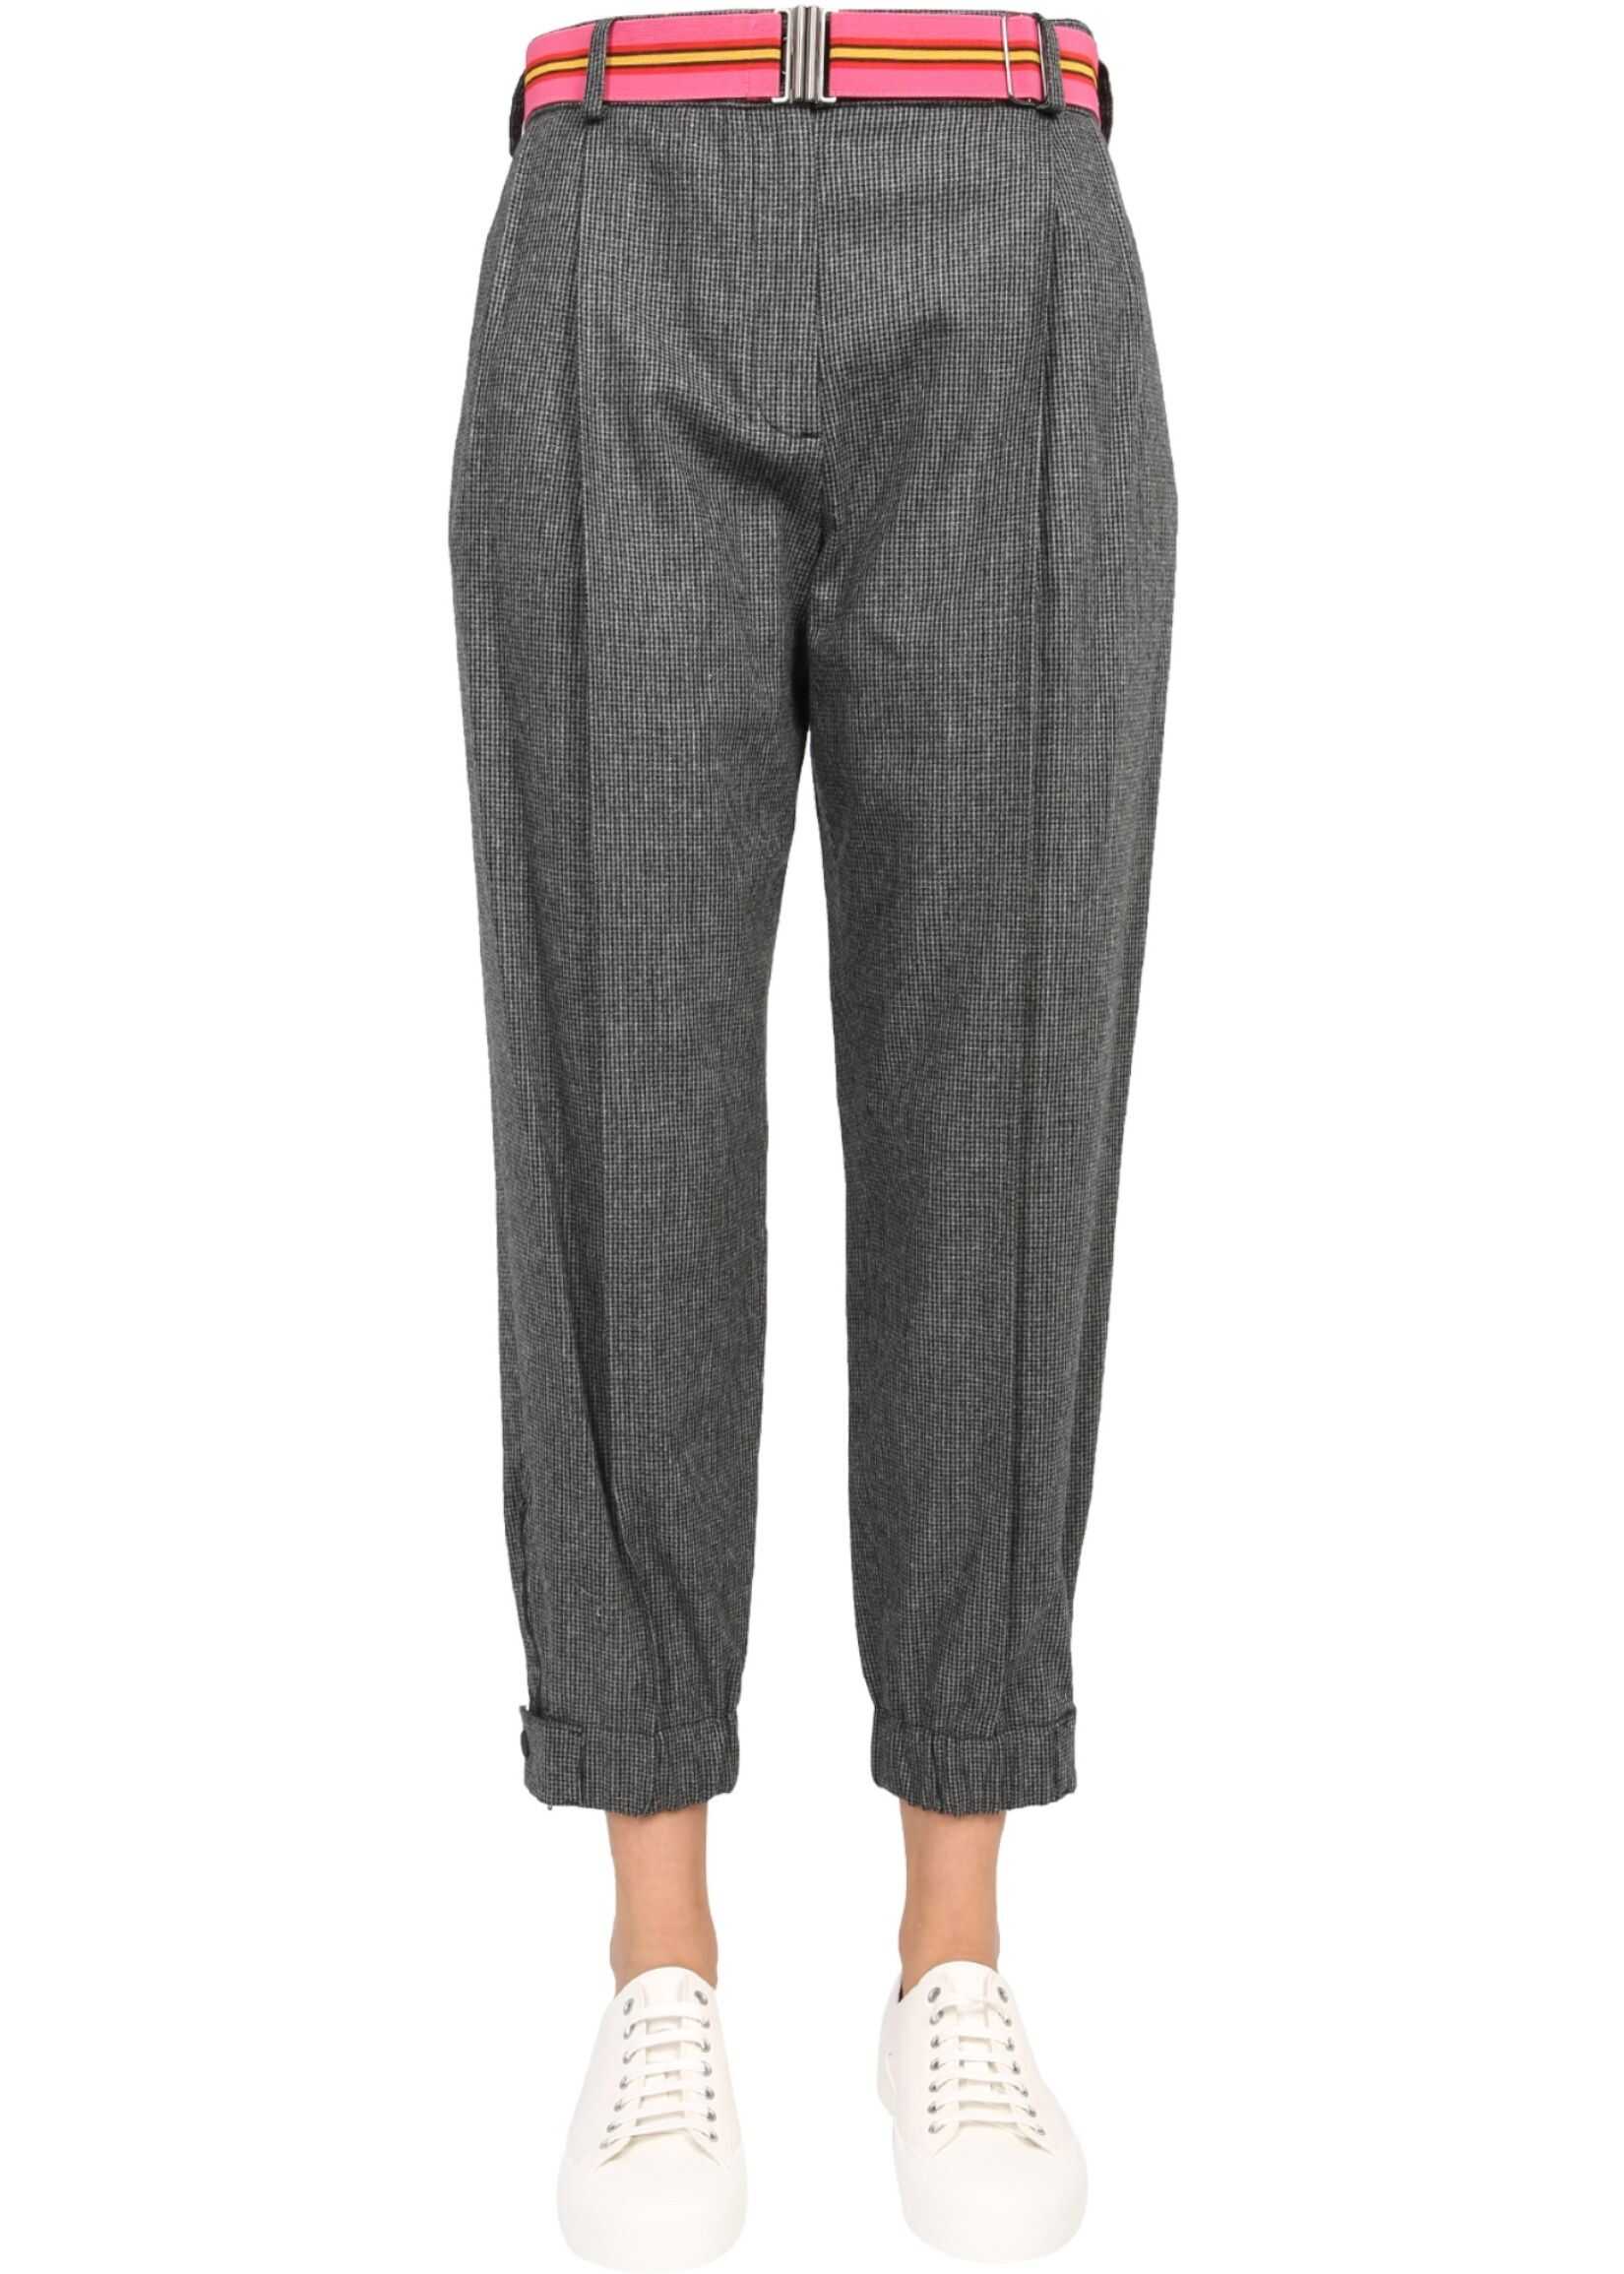 PS by Paul Smith Trousers With Belt GREY